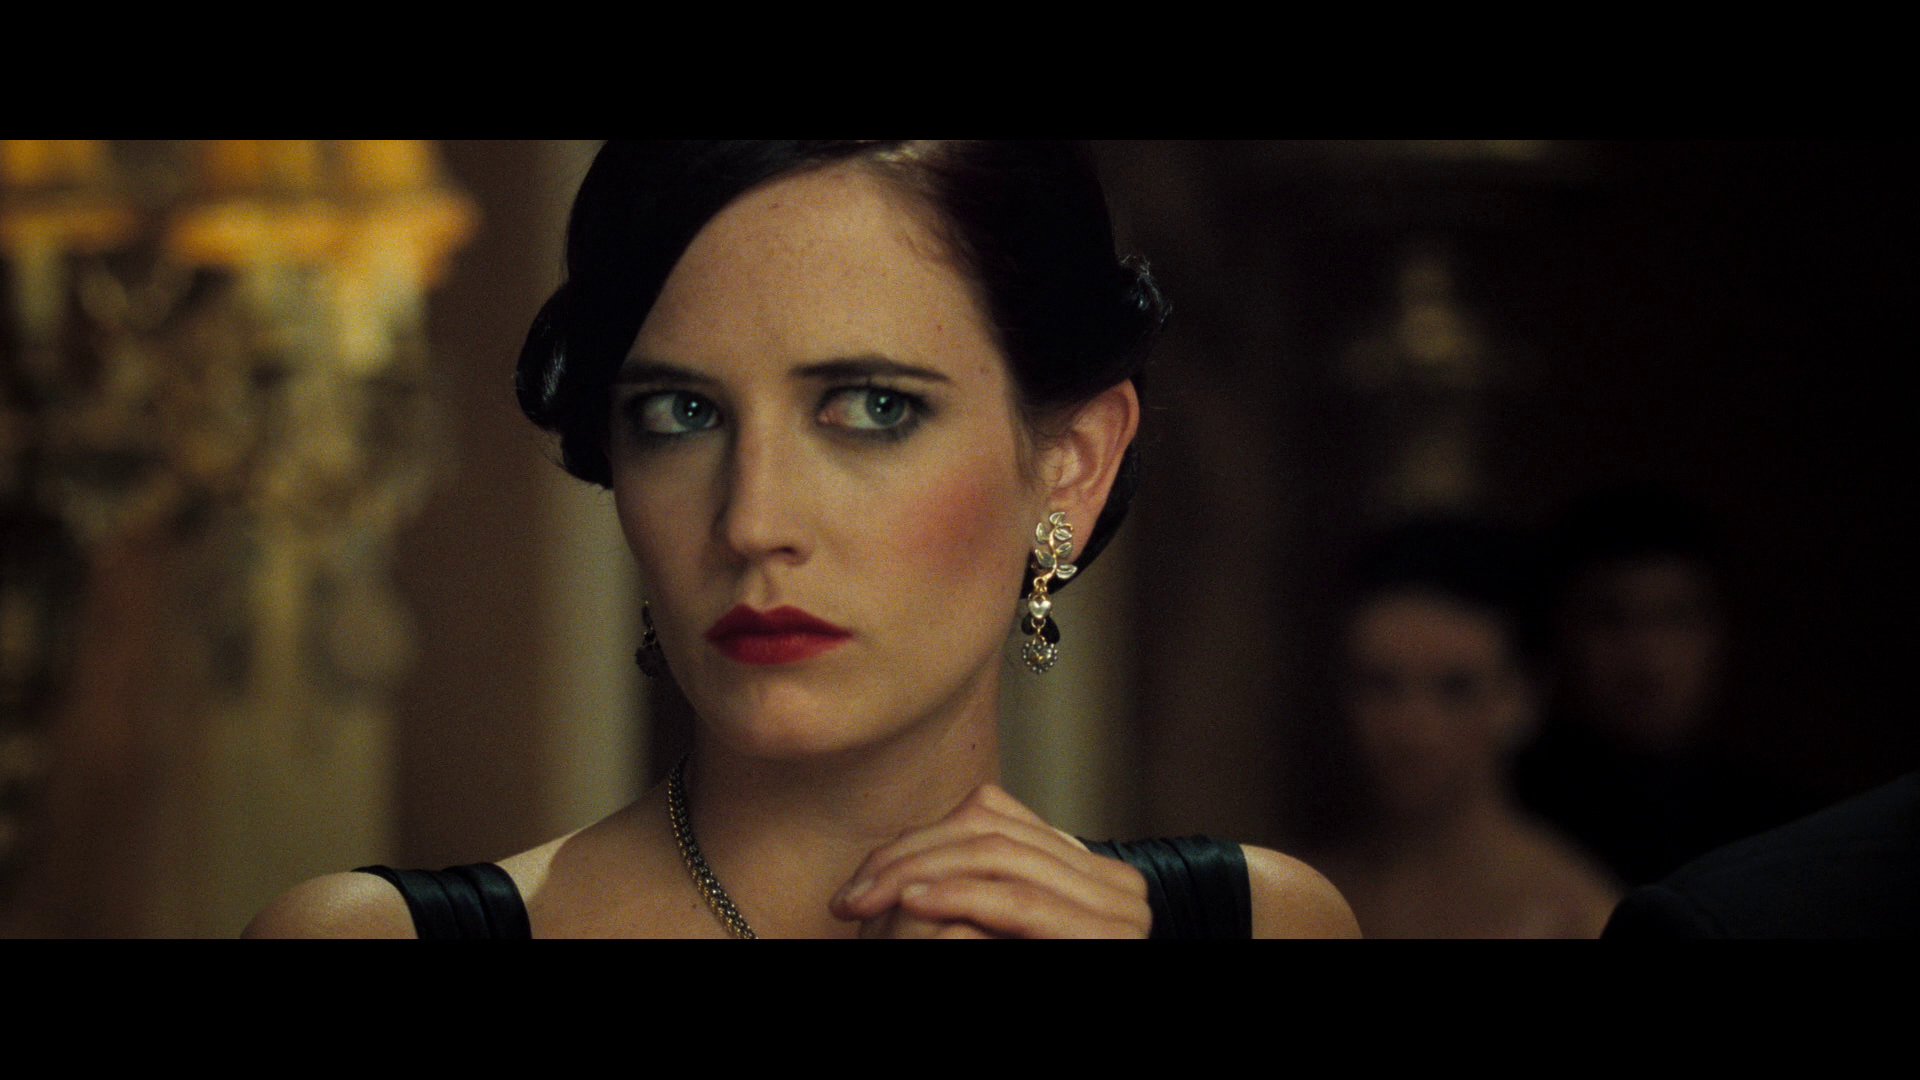 How Did James Bond Uncover Vesper Lynd's Betrayal in the Movie Casino Royale?